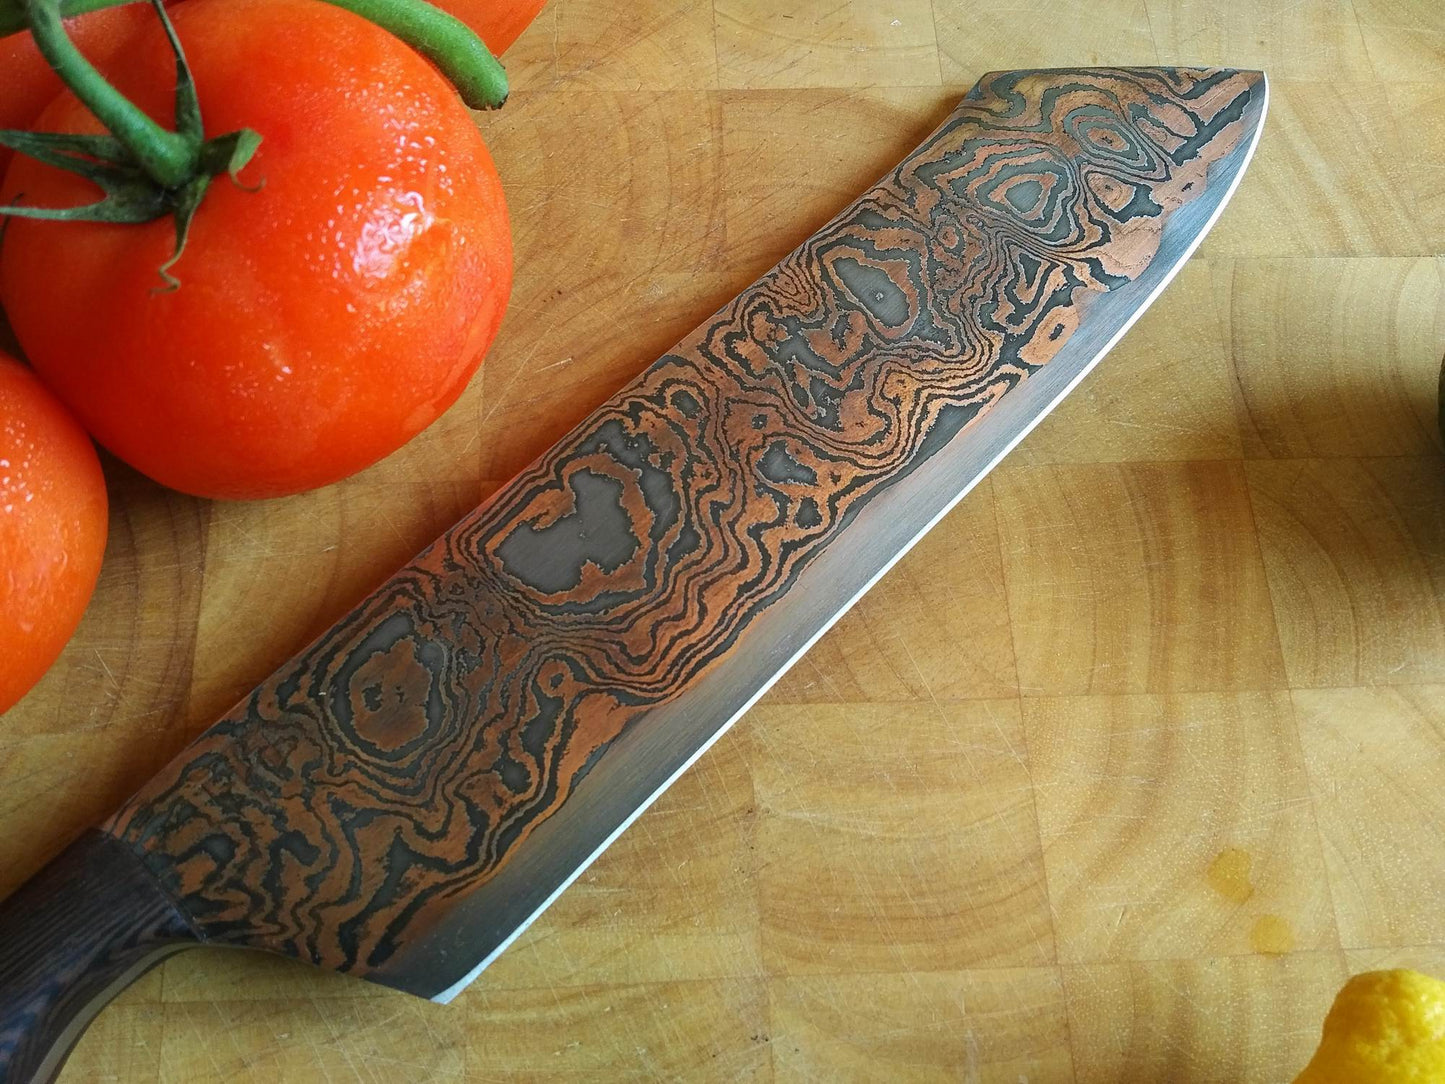 SOLD - Custom Cleaver with Copper etched San Mai Damascus Steel Blade